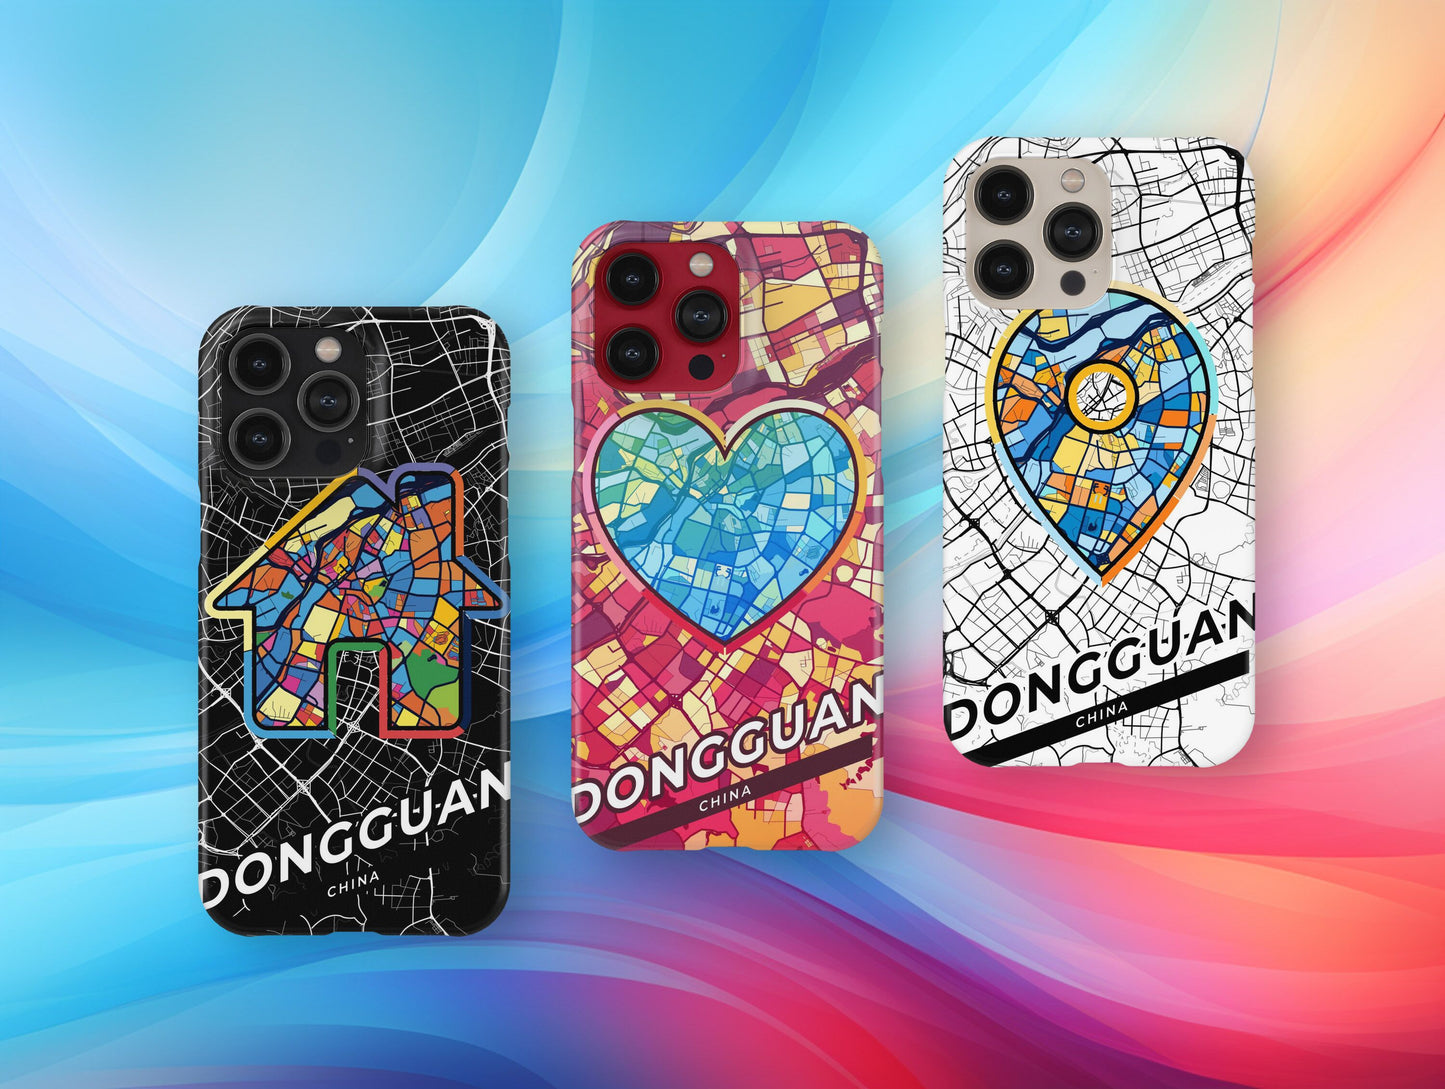 Dongguan China slim phone case with colorful icon. Birthday, wedding or housewarming gift. Couple match cases.